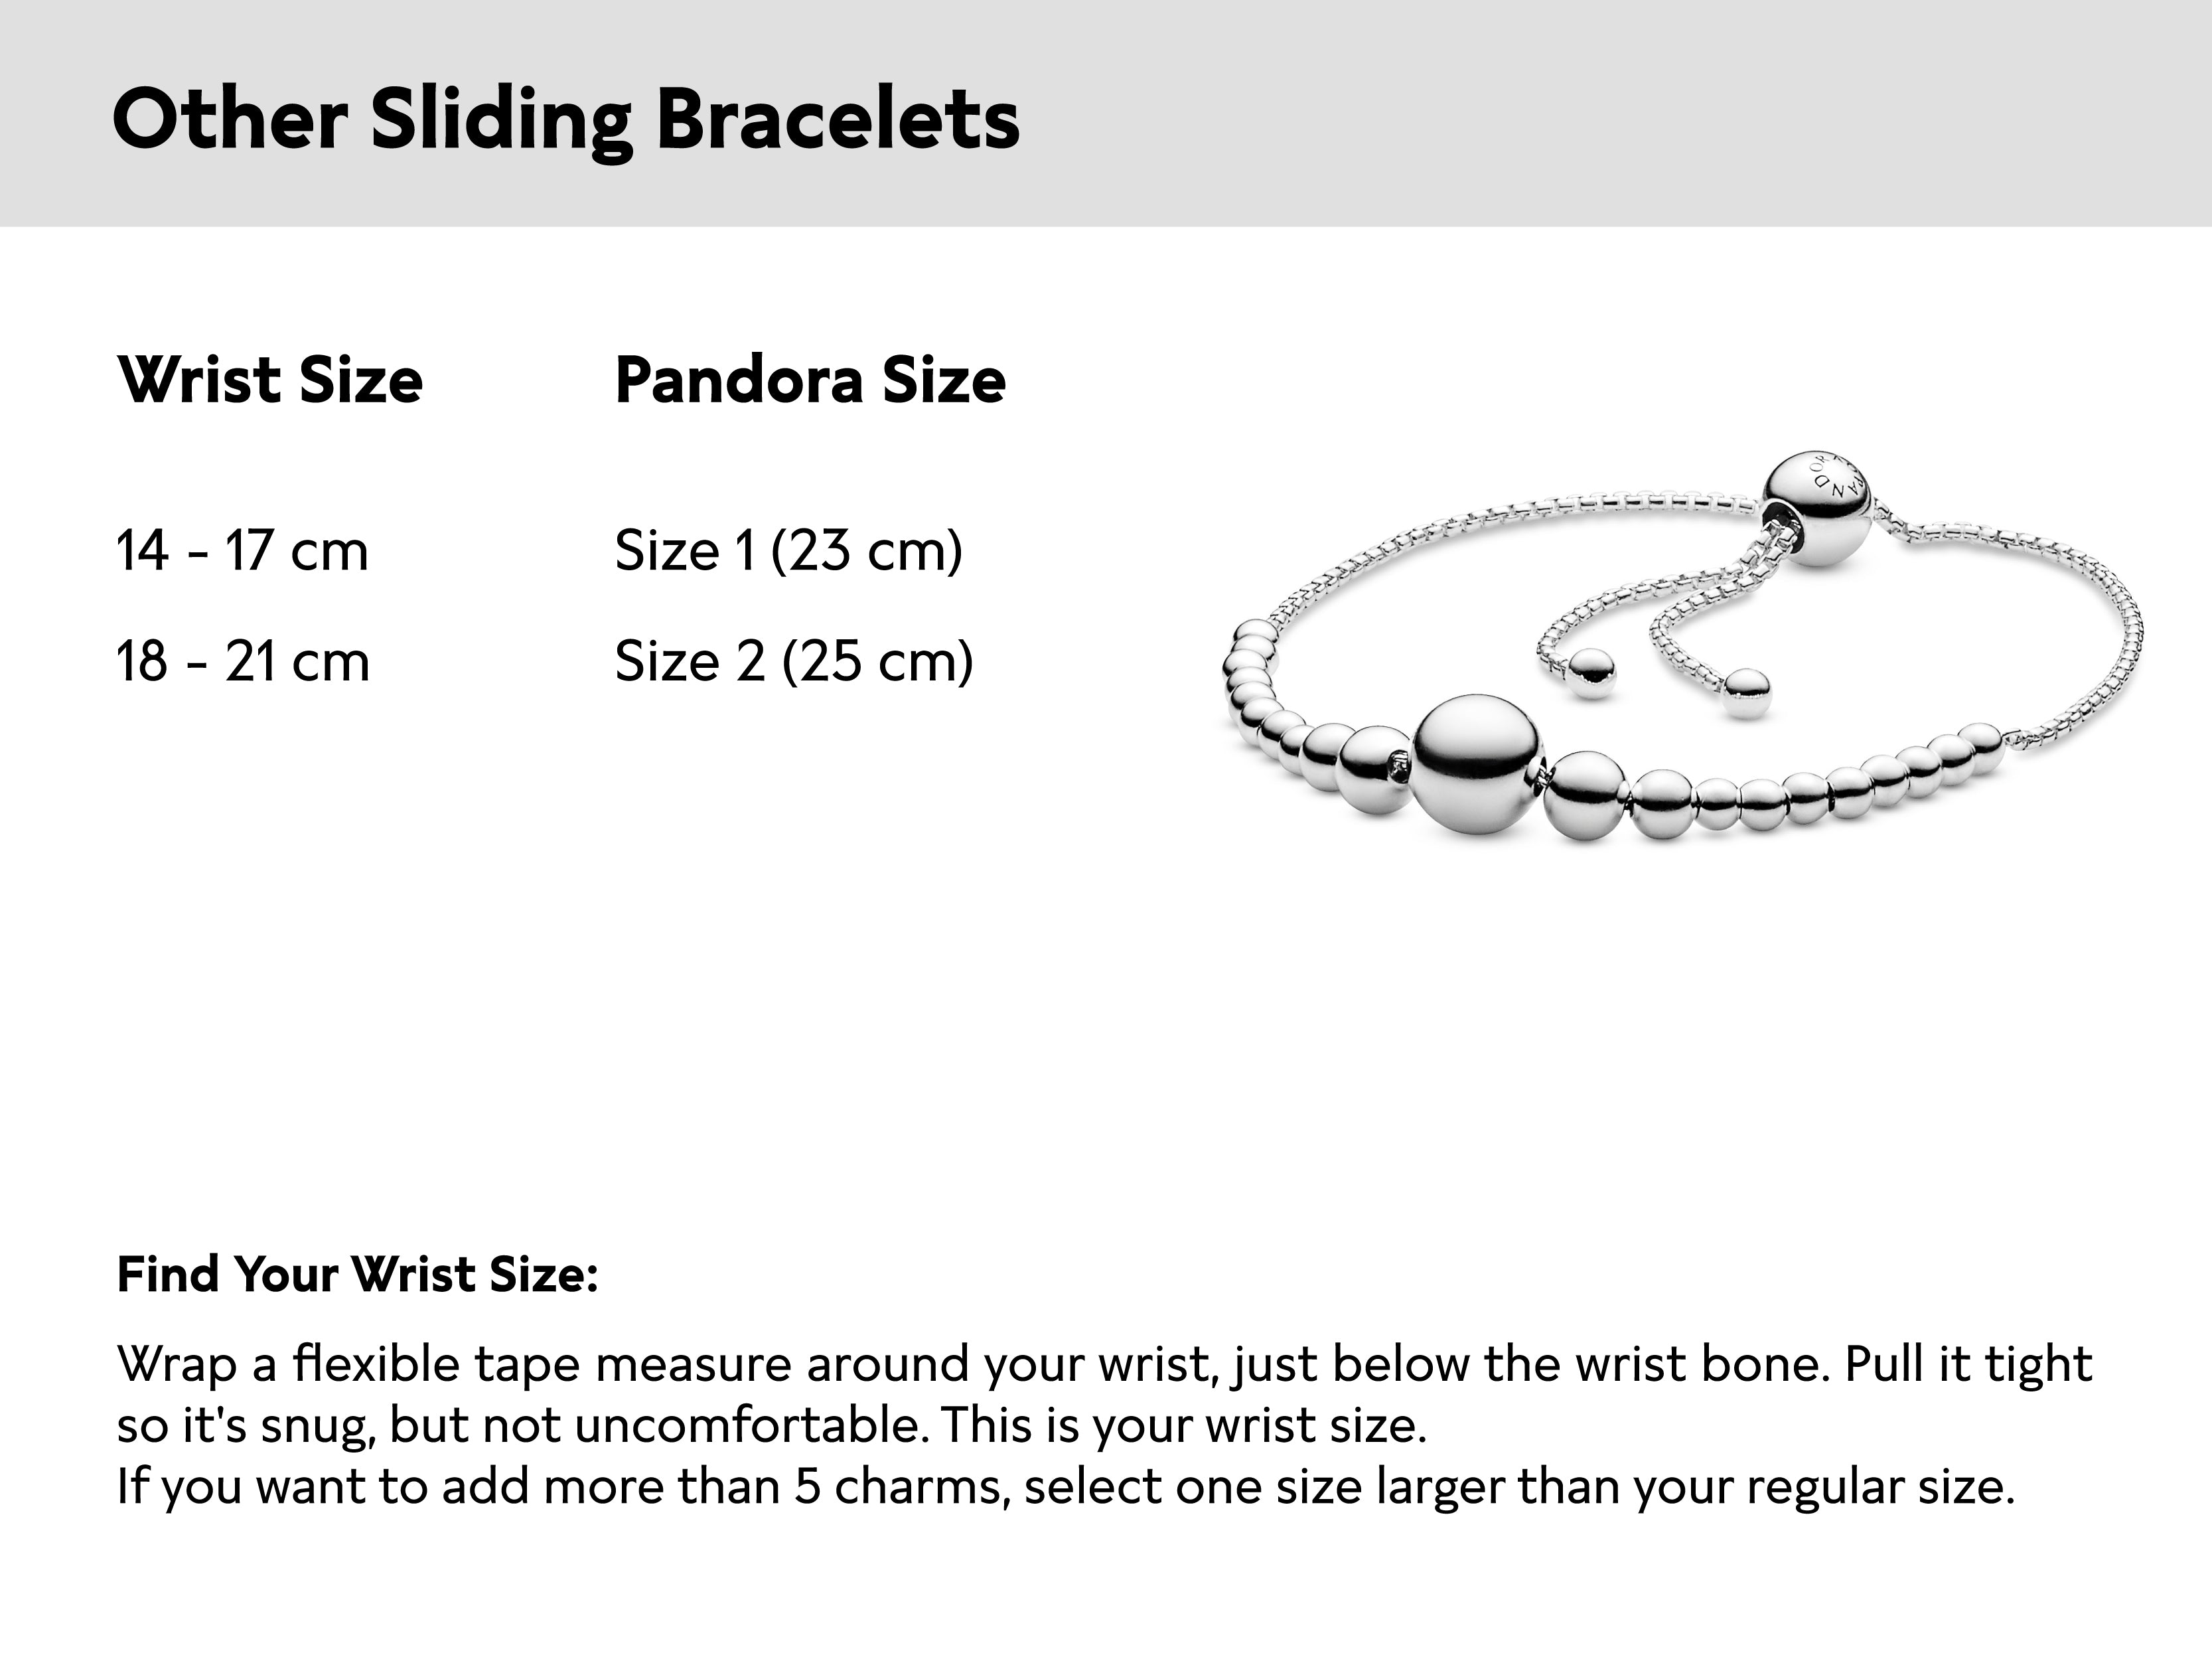 Ring Size Chart & Measurement Guide at Michael Hill Australia